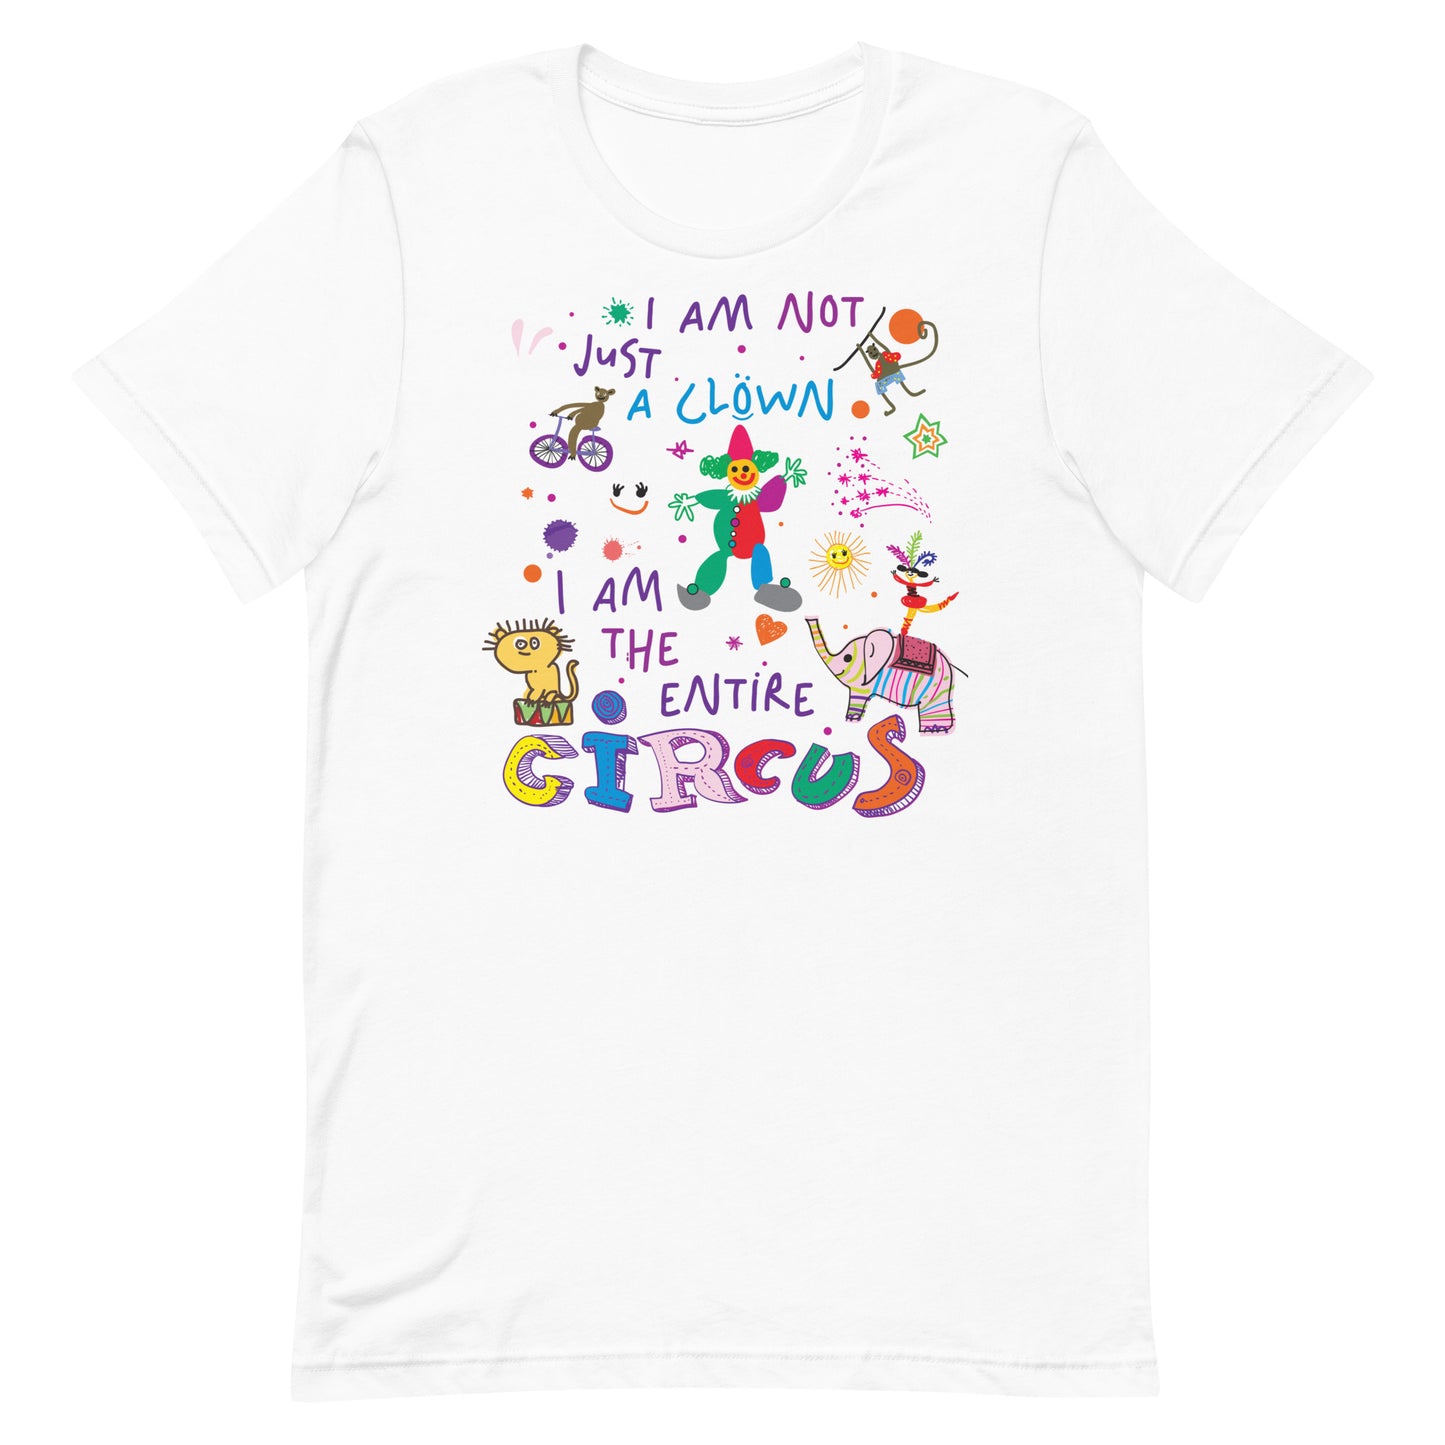 I Am Not Just the Clown But the Entire Circus Unisex t-shirt